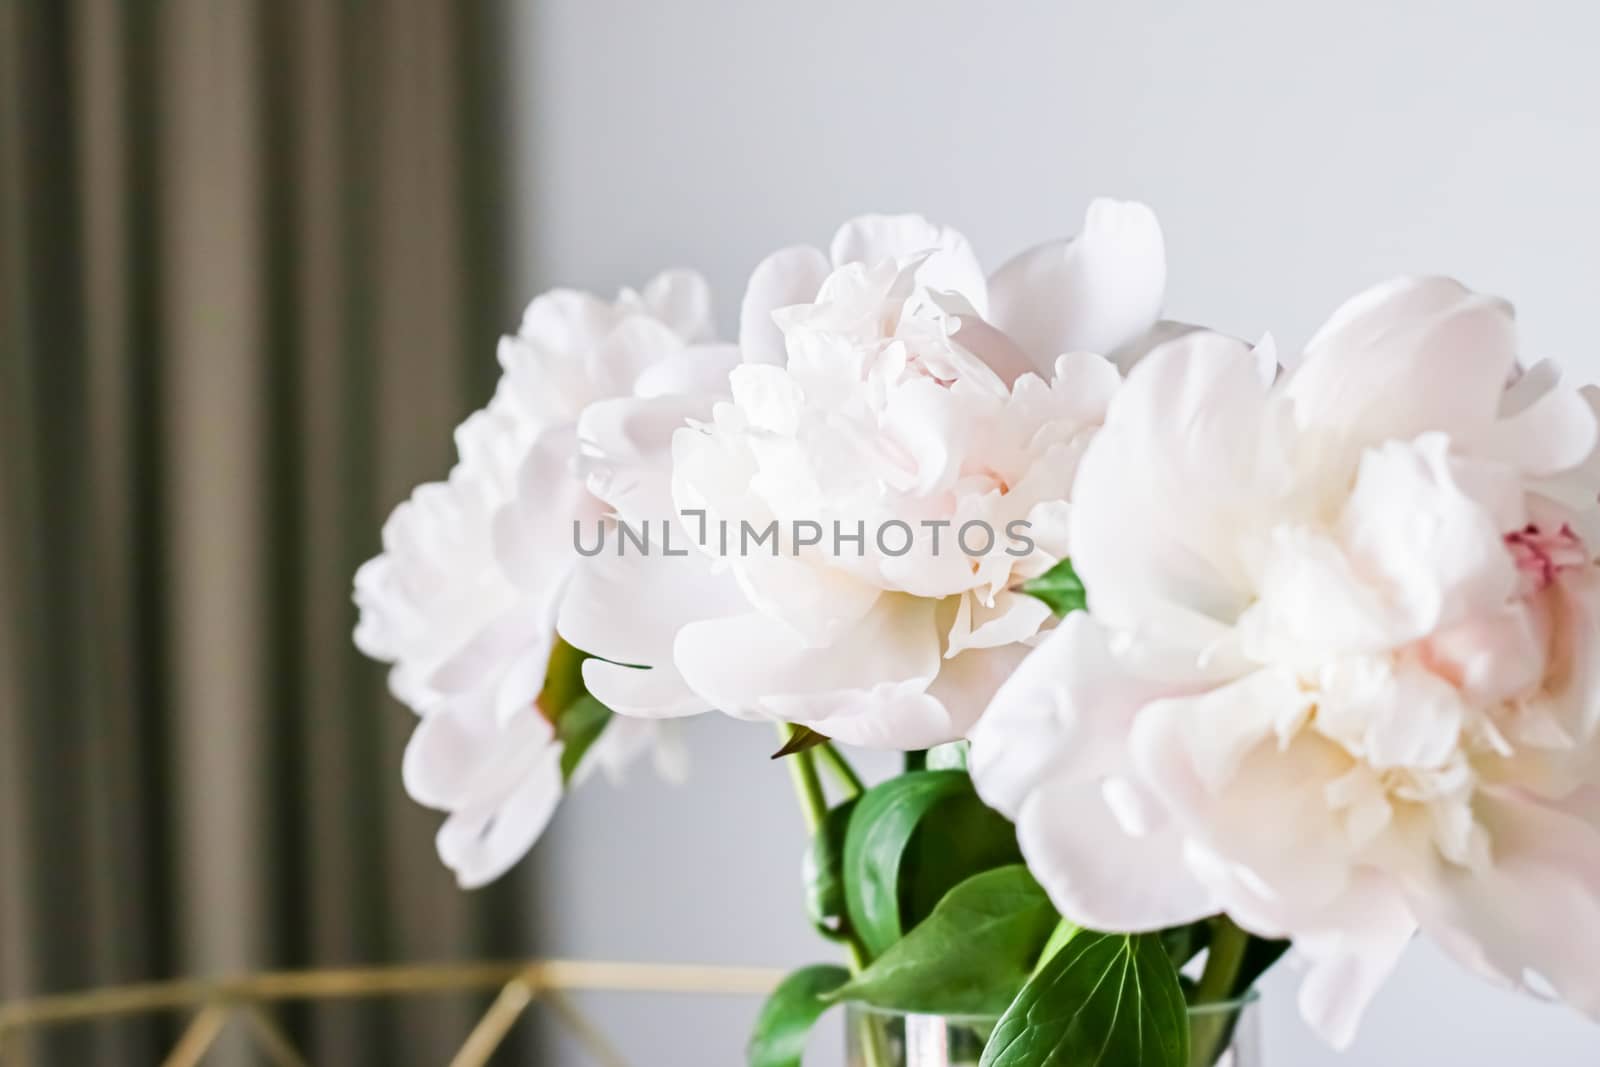 Chic bouquet of peony flowers in vase as home decor idea, luxury interior design and decoration concept